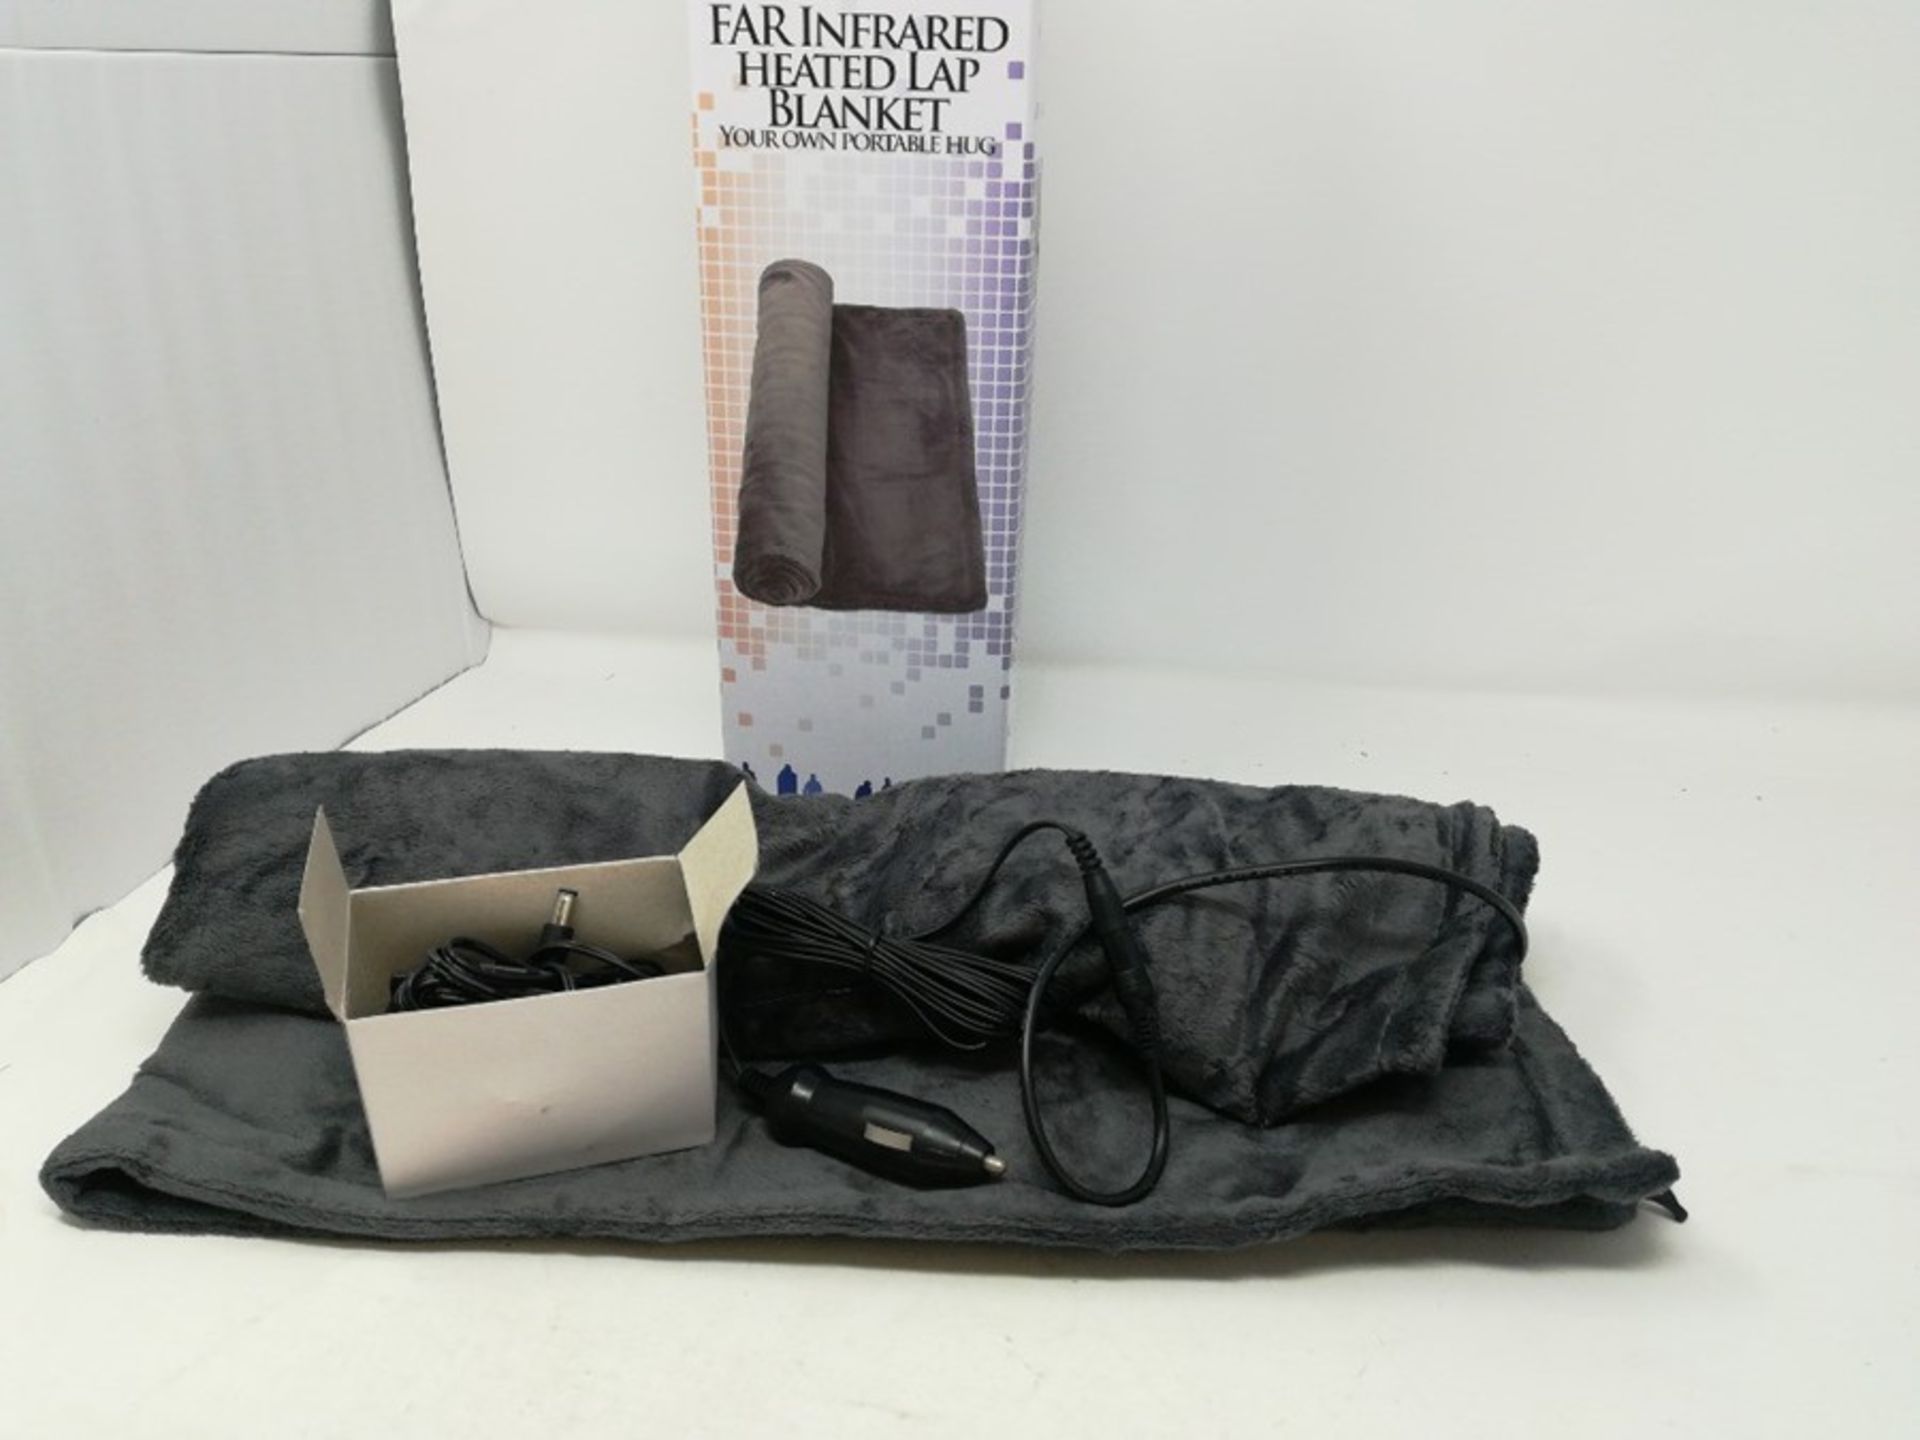 Lifemax FAR Infrared Heated Lap Blanket - Image 2 of 2